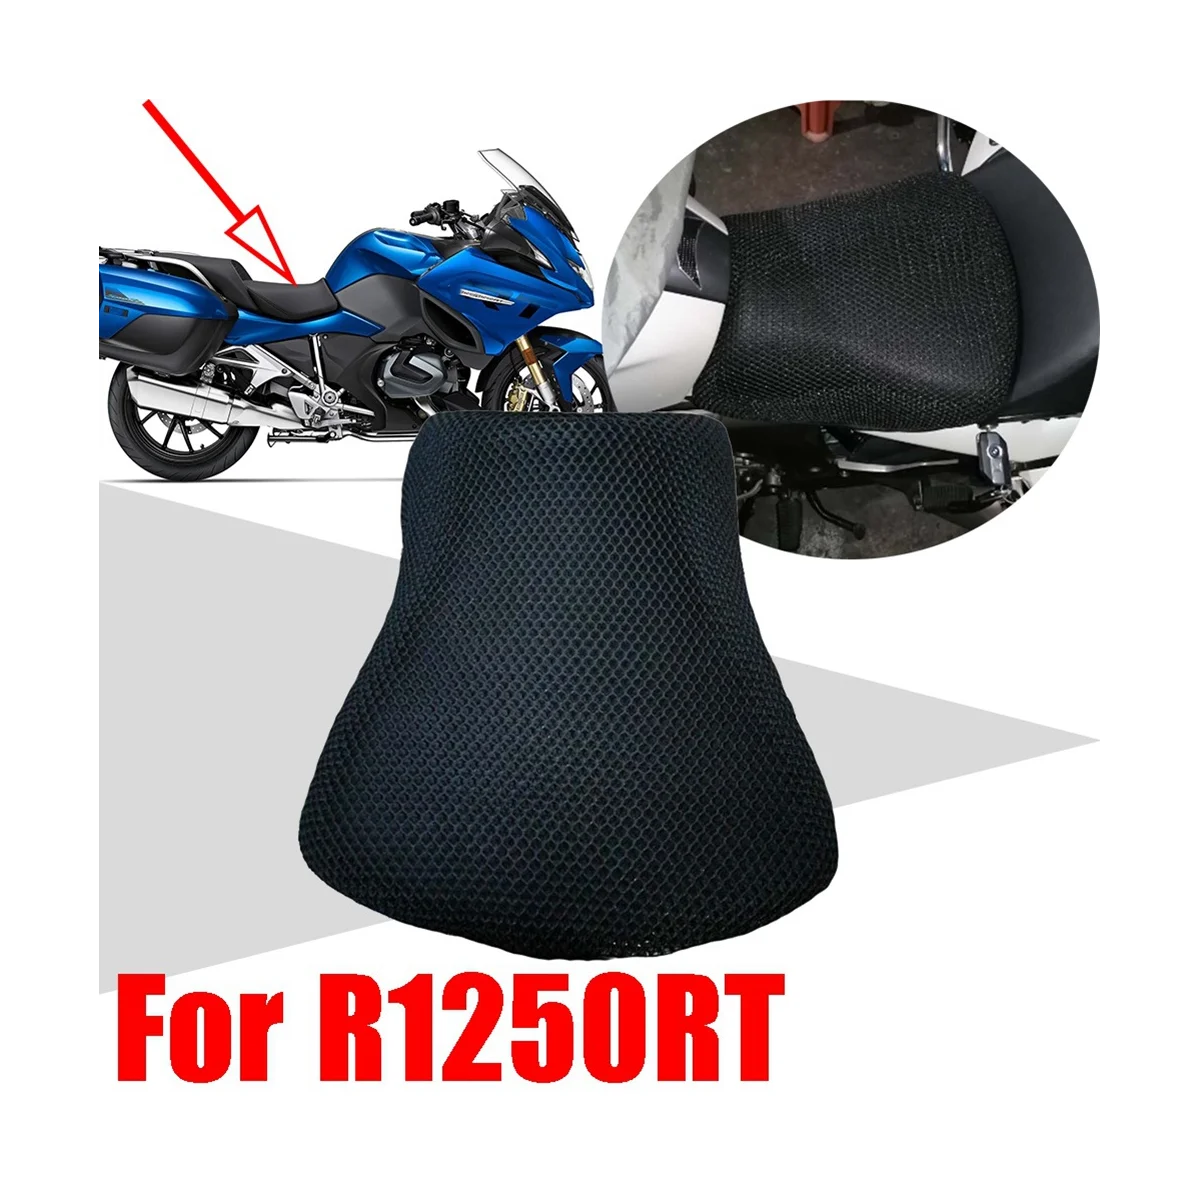 

Motorcycle Mesh Seat Cover Heat Insulation Seat Cushion Cover Protector for BMW R1250RT R1250 RT R 1250 RT R 1250RT